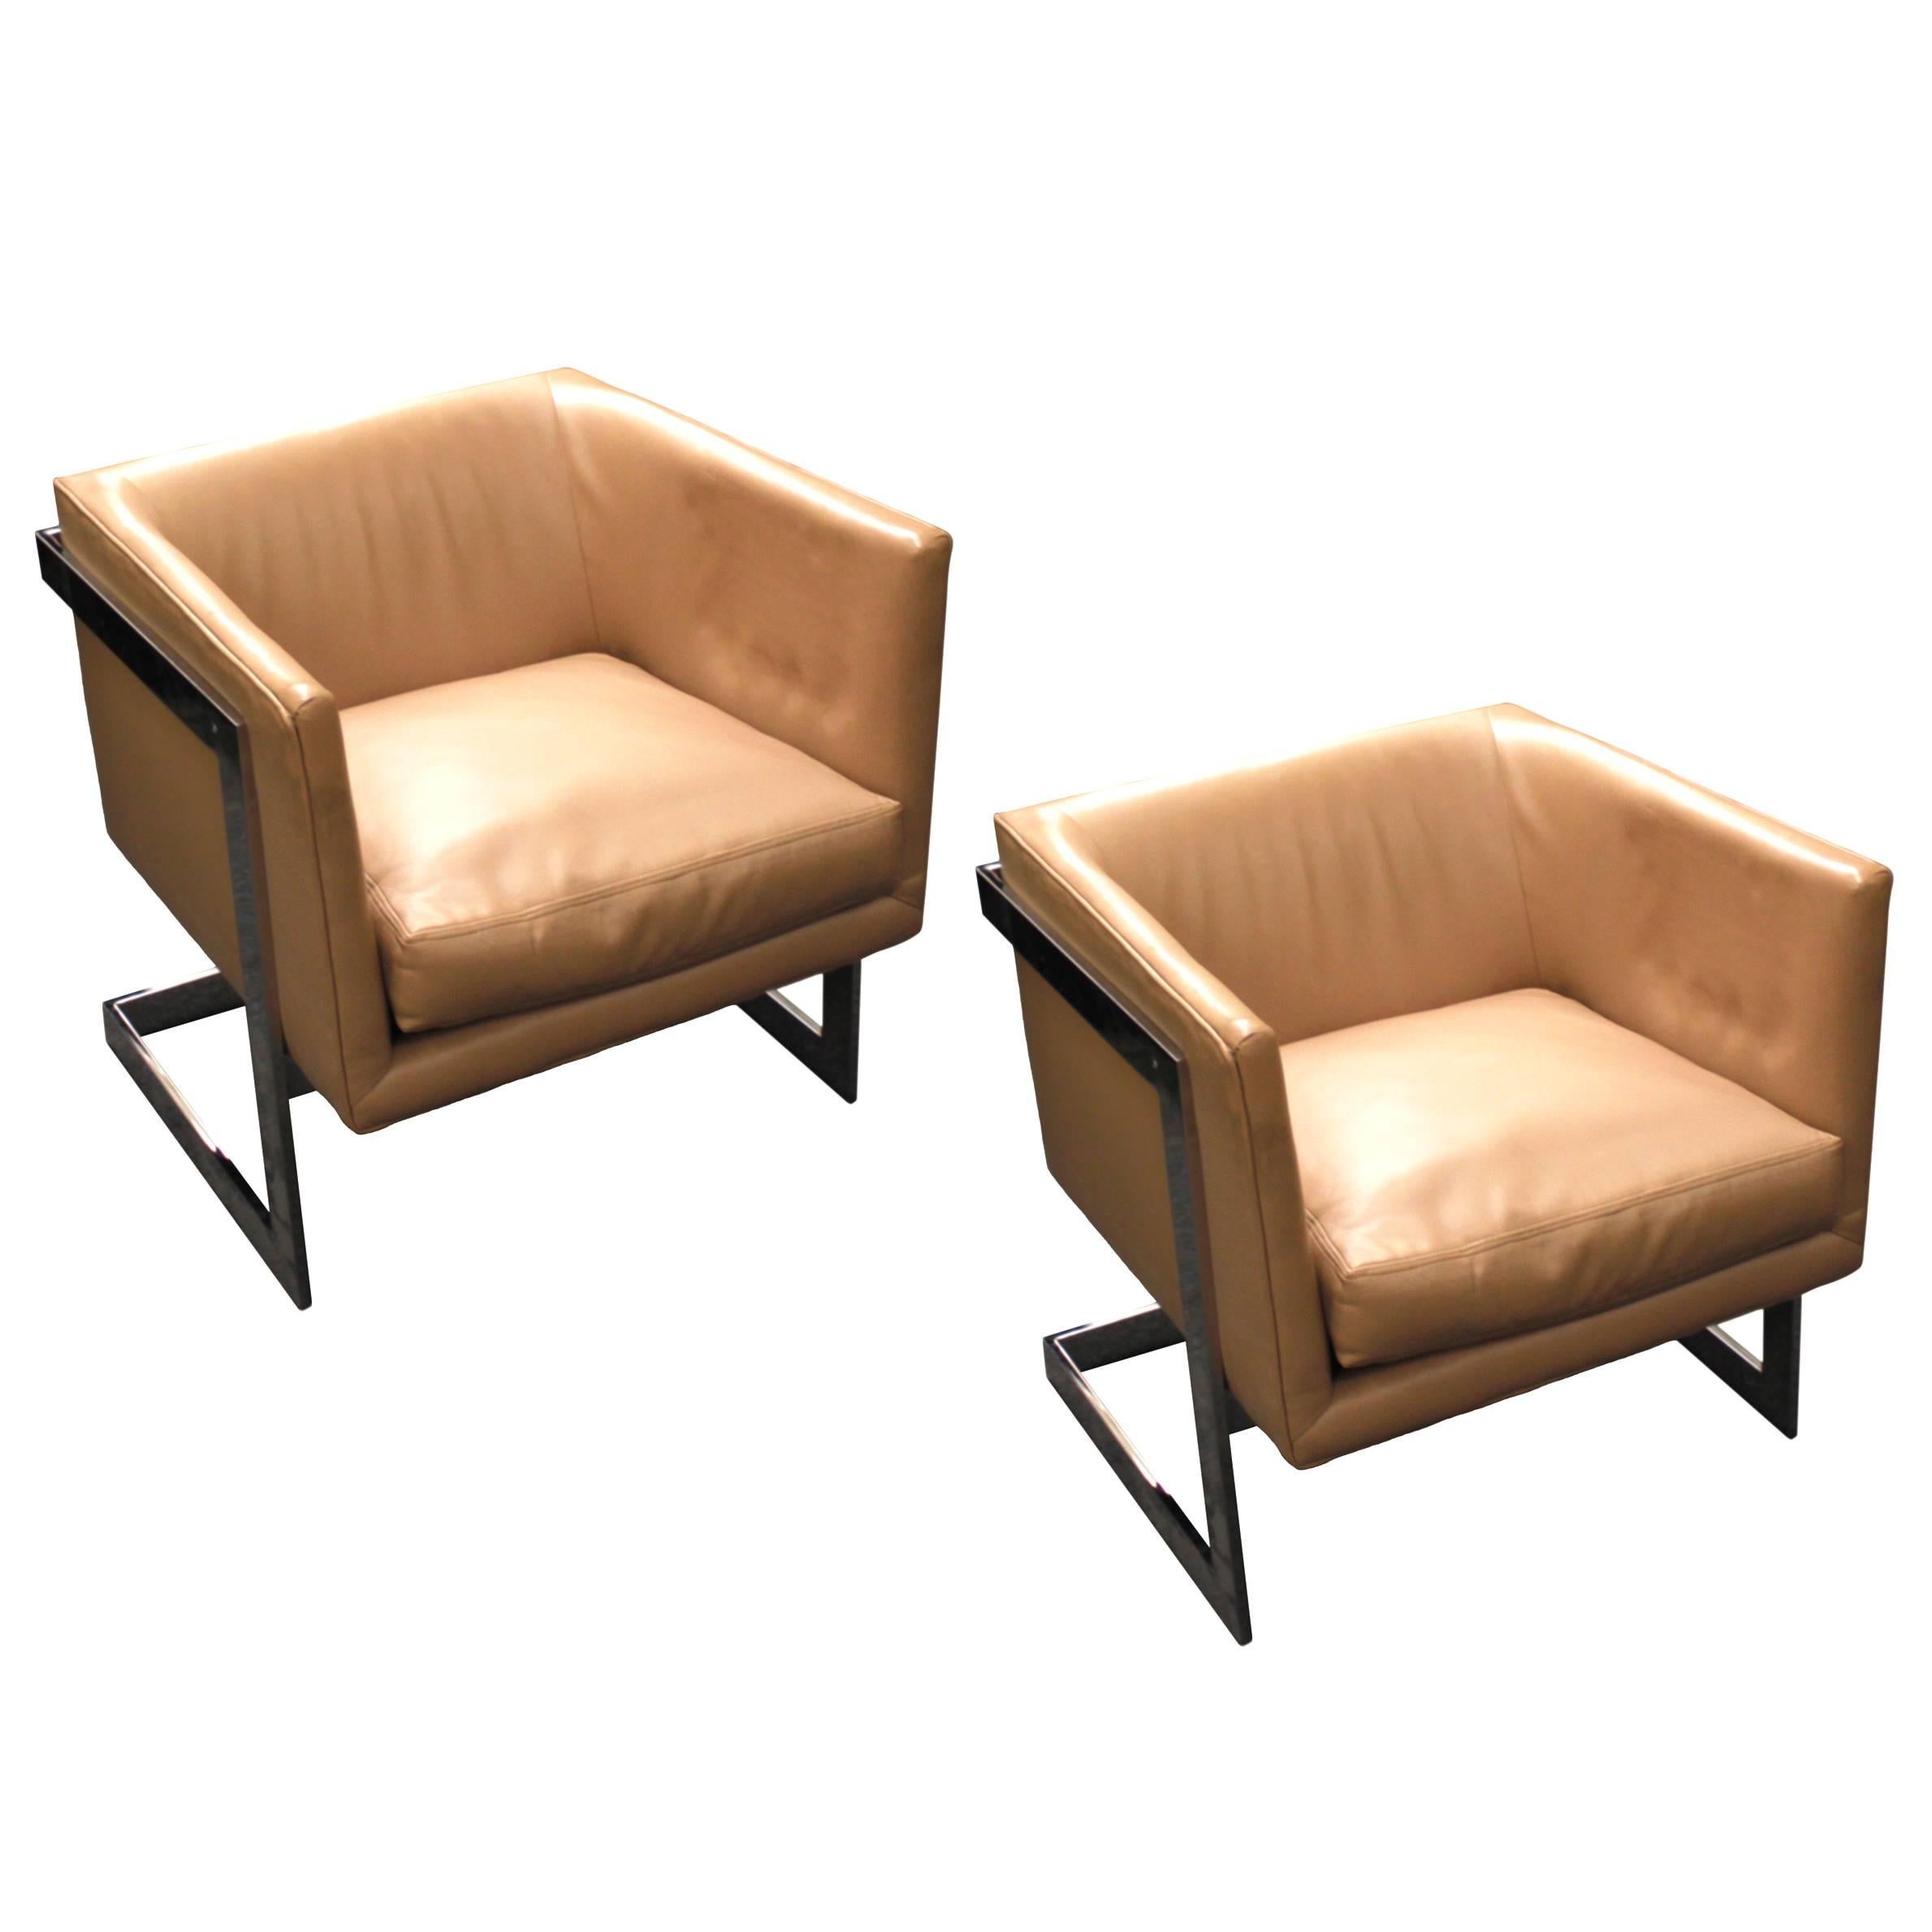 Pair of Milo Baughman "Cube" Chairs with Chromed Metal "T" Back For Sale